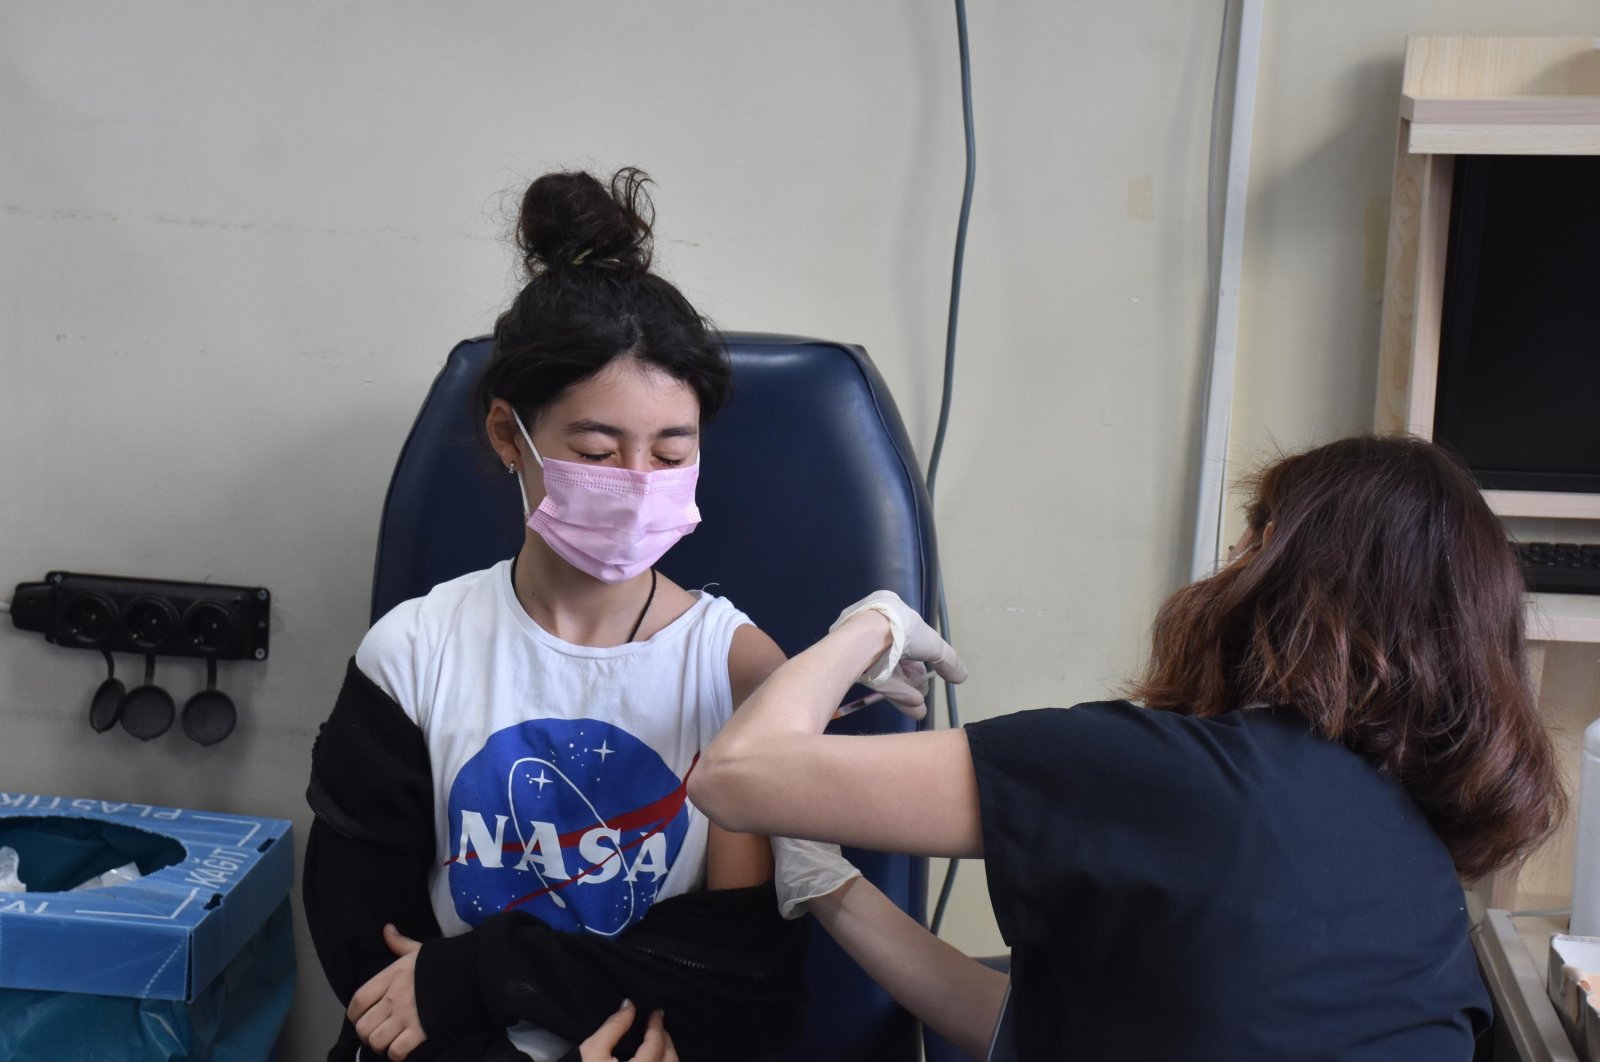 A woman gets vaccinated against COVID-19 at a hospital in Izmir, western Turkey, Nov. 16, 2021. (DHA Photo)